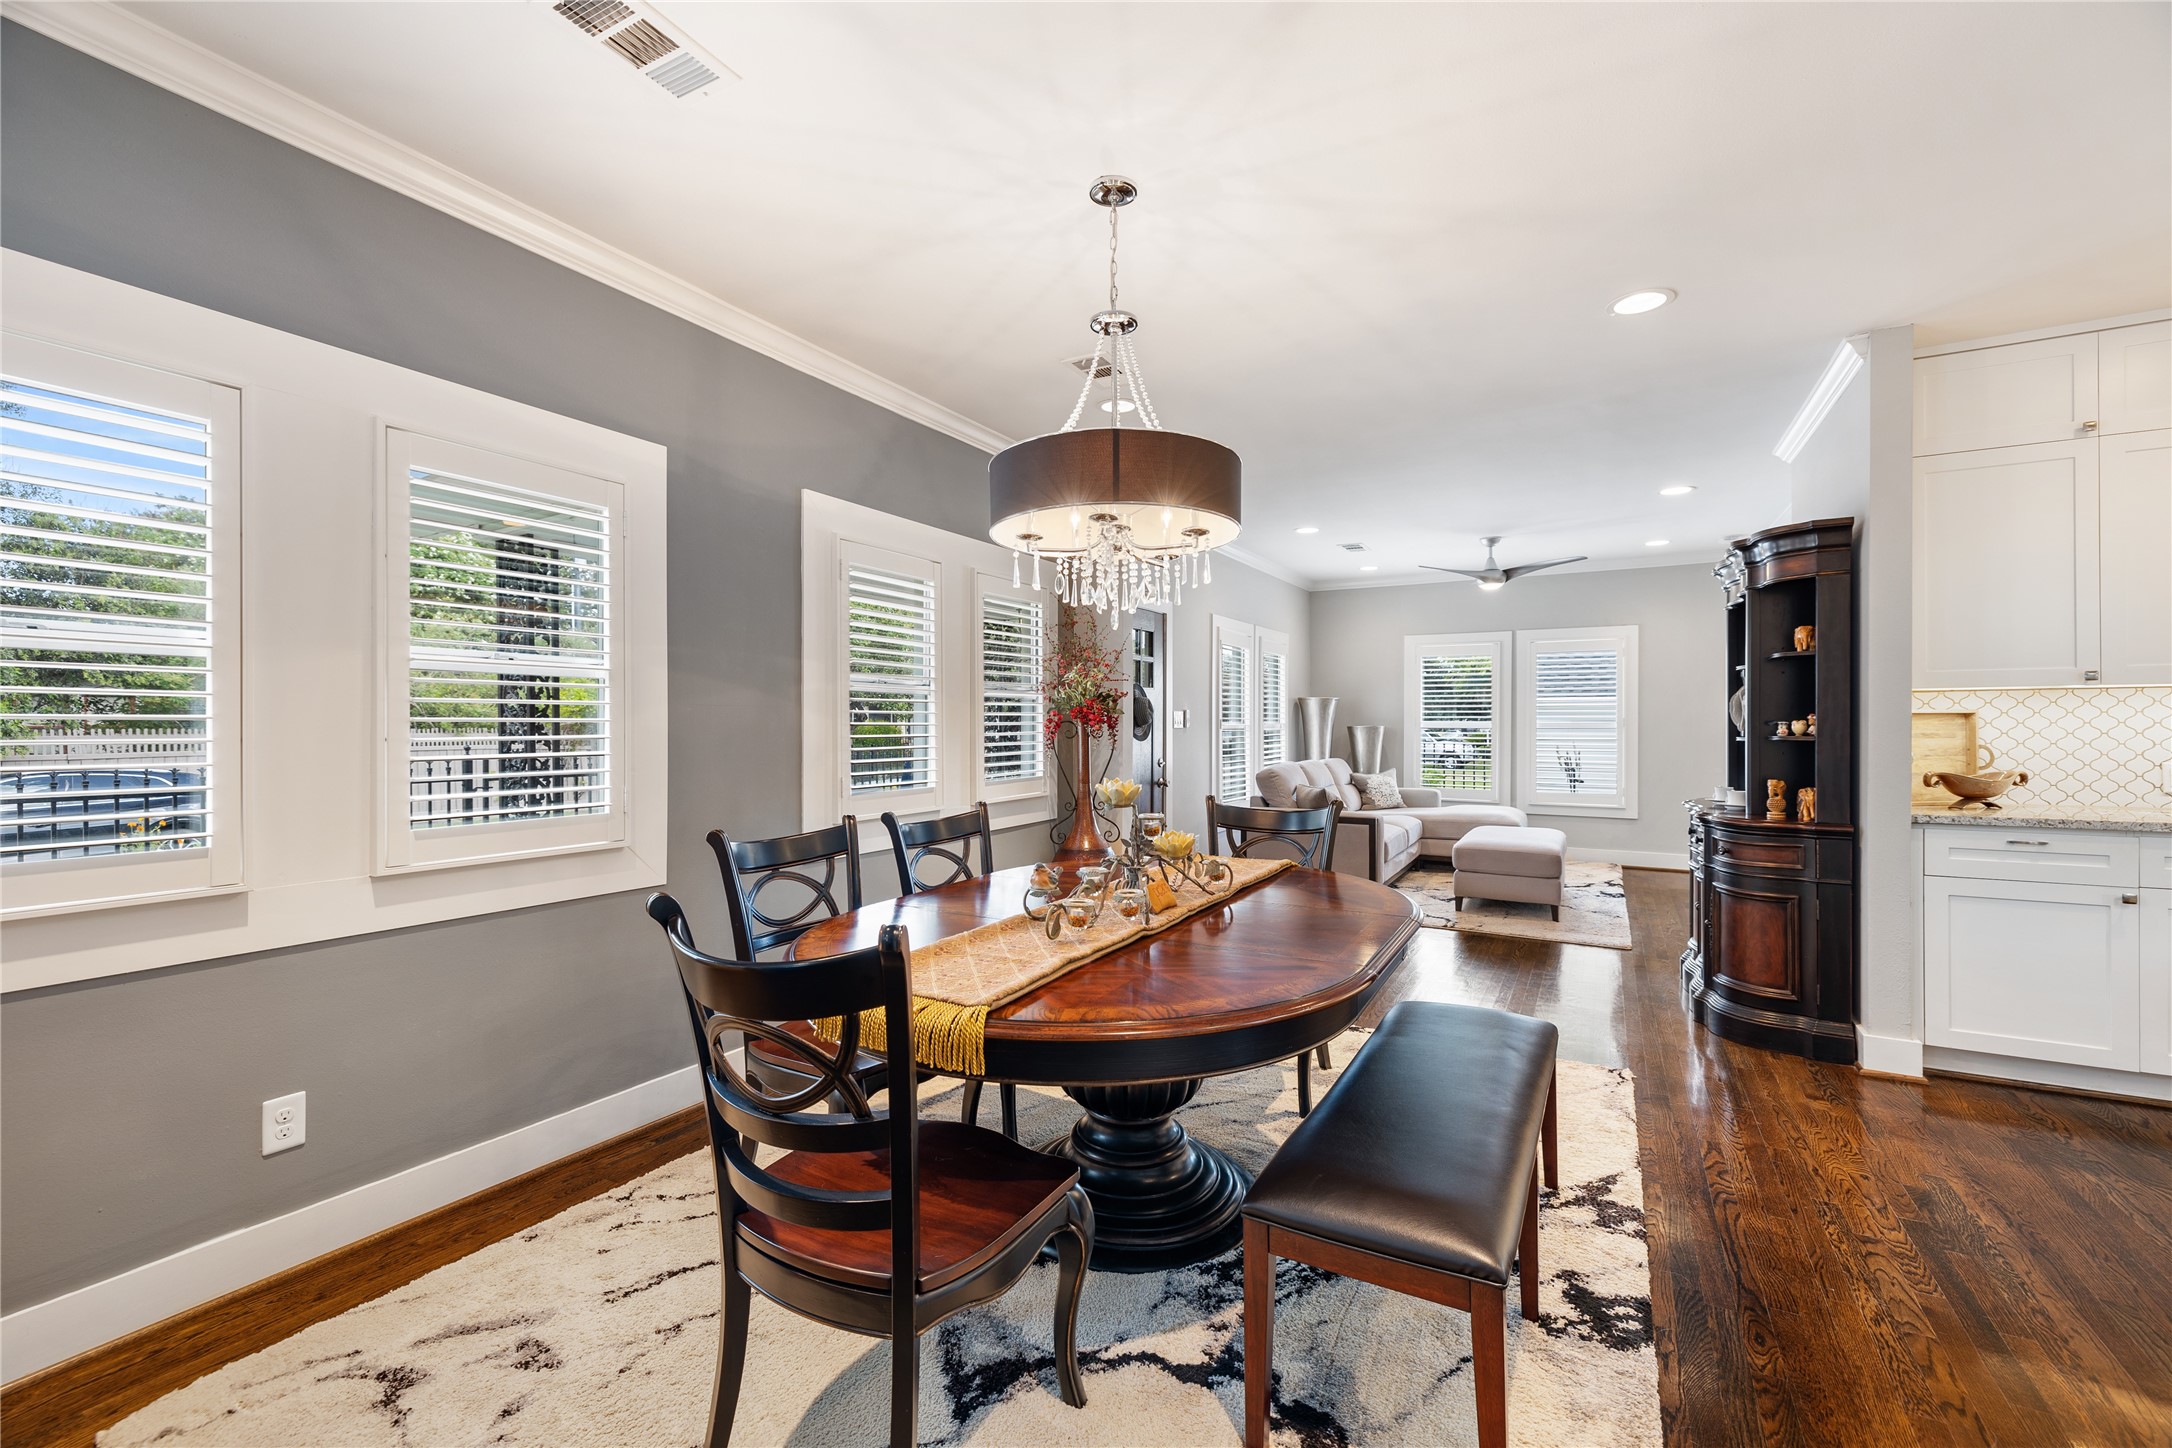 Open to both the living and kitchen, this dining space makes for a great place to entertain. Throughout the home, you will find these new, gorgeous wood shutters designed without tie bars for increased light options and double-pane windows.